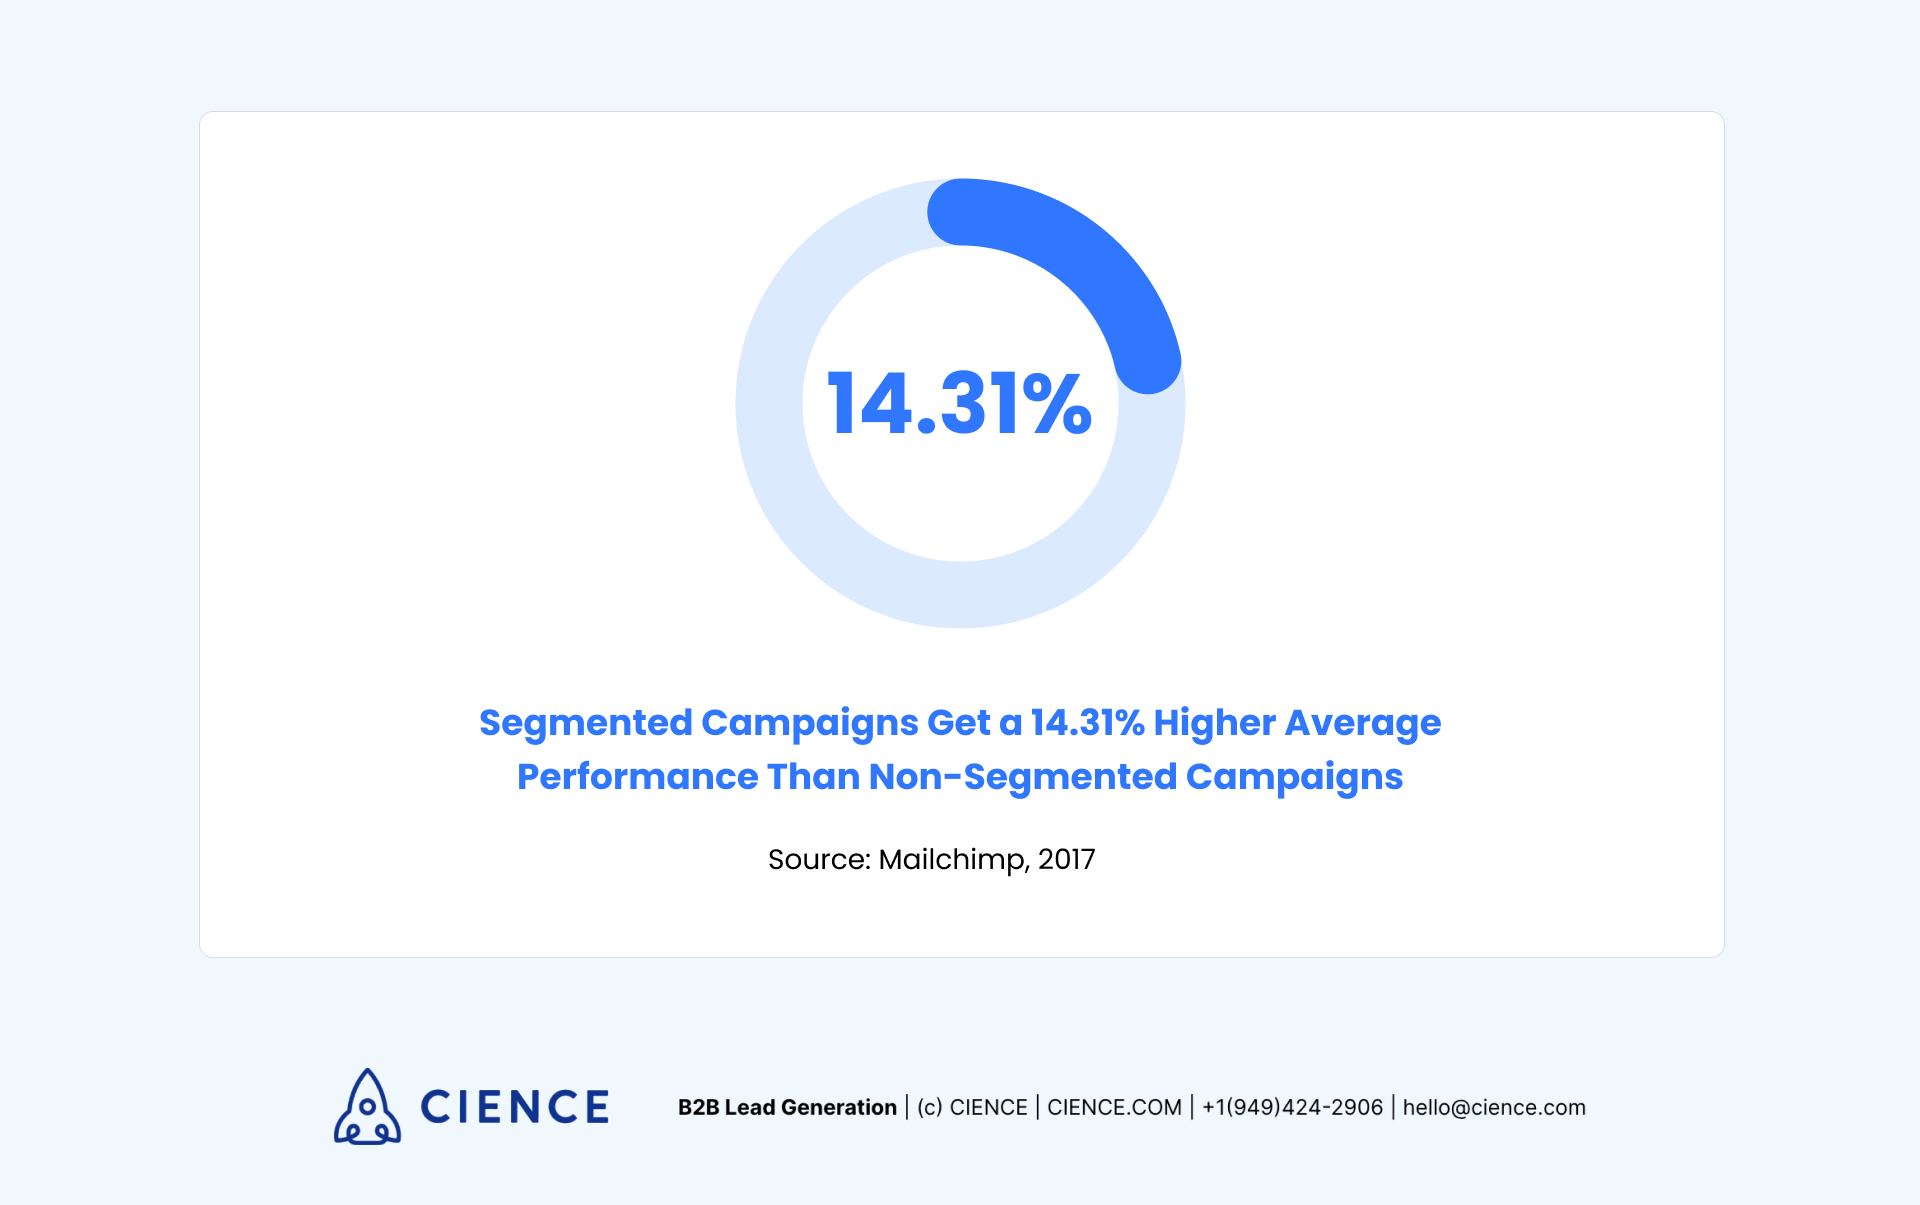 Segmented Campaigns Get a 14.31% Higher Average Performance Than Non-Segmented Campaigns